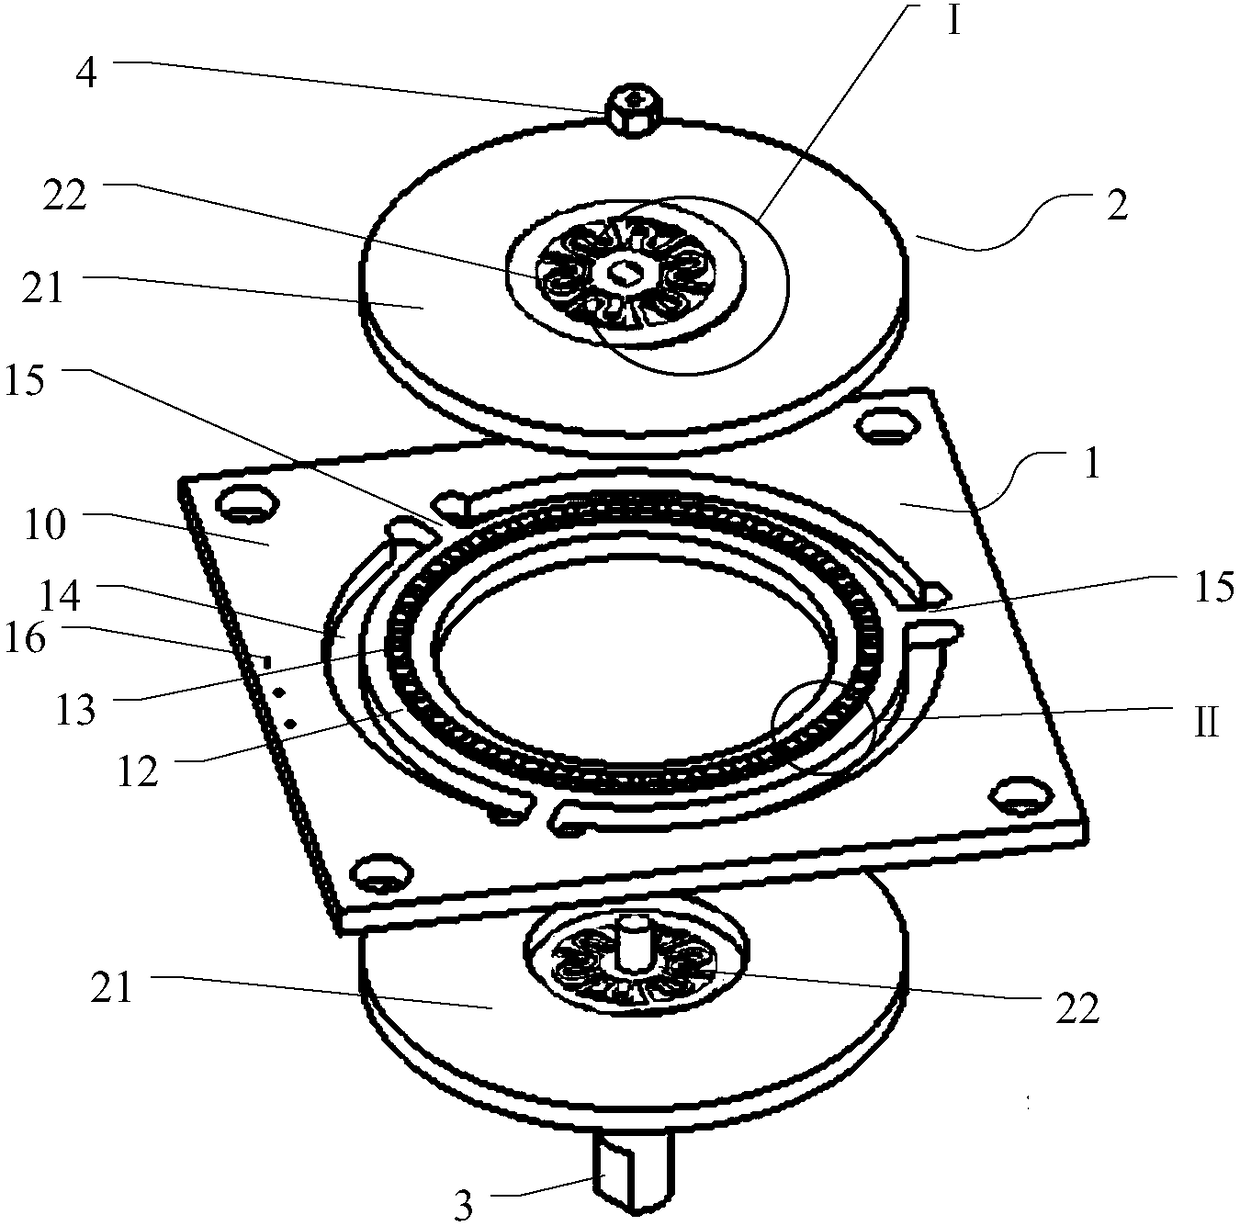 An ultrasonic motor with multi-stator planar array structure